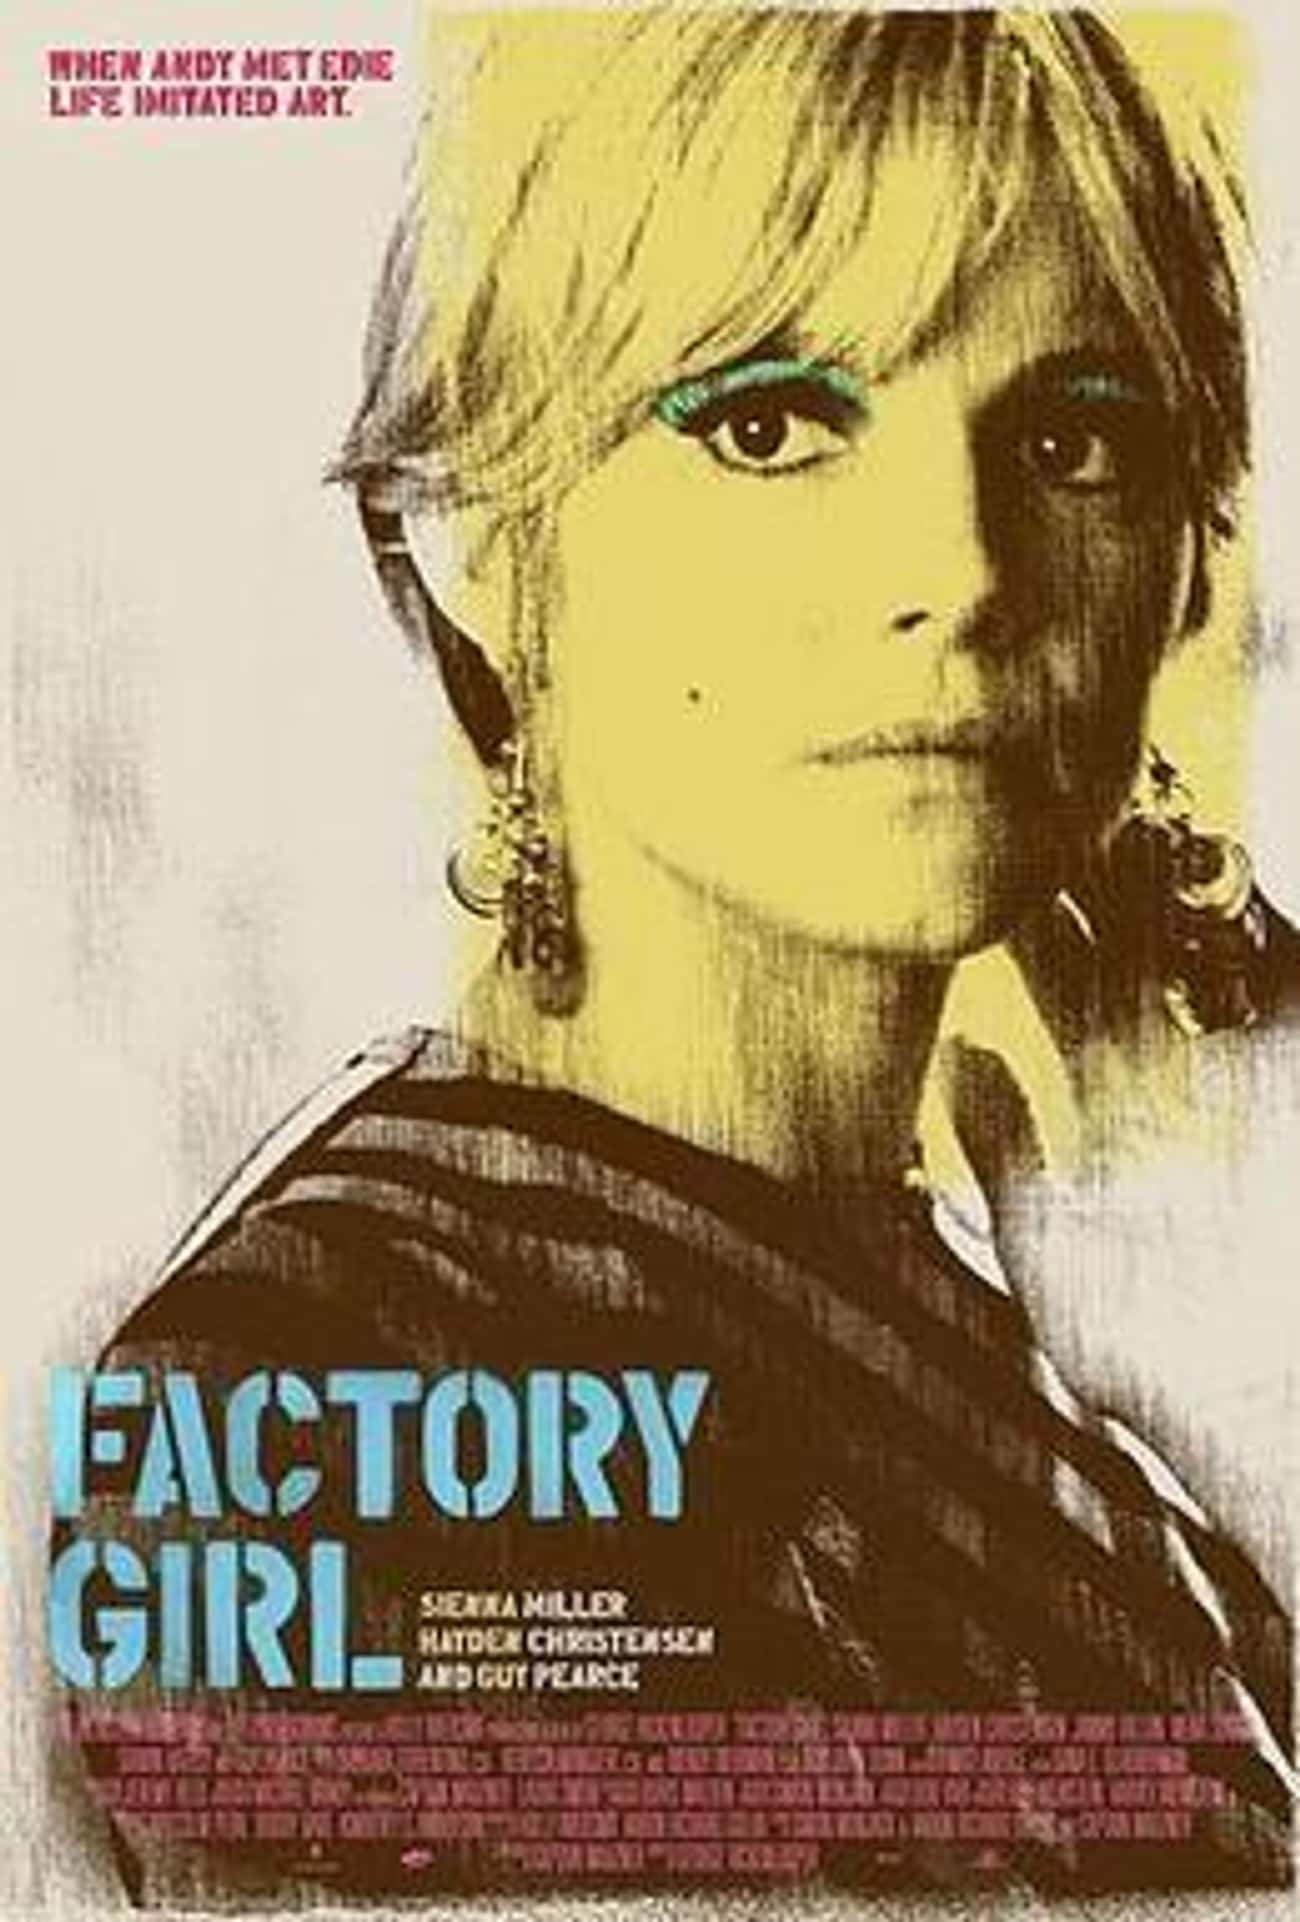 Mid-2005: Holmes Turns Down A Role In 'Factory Girl,' Allegedly Due To Scientology's Views On Psychiatry